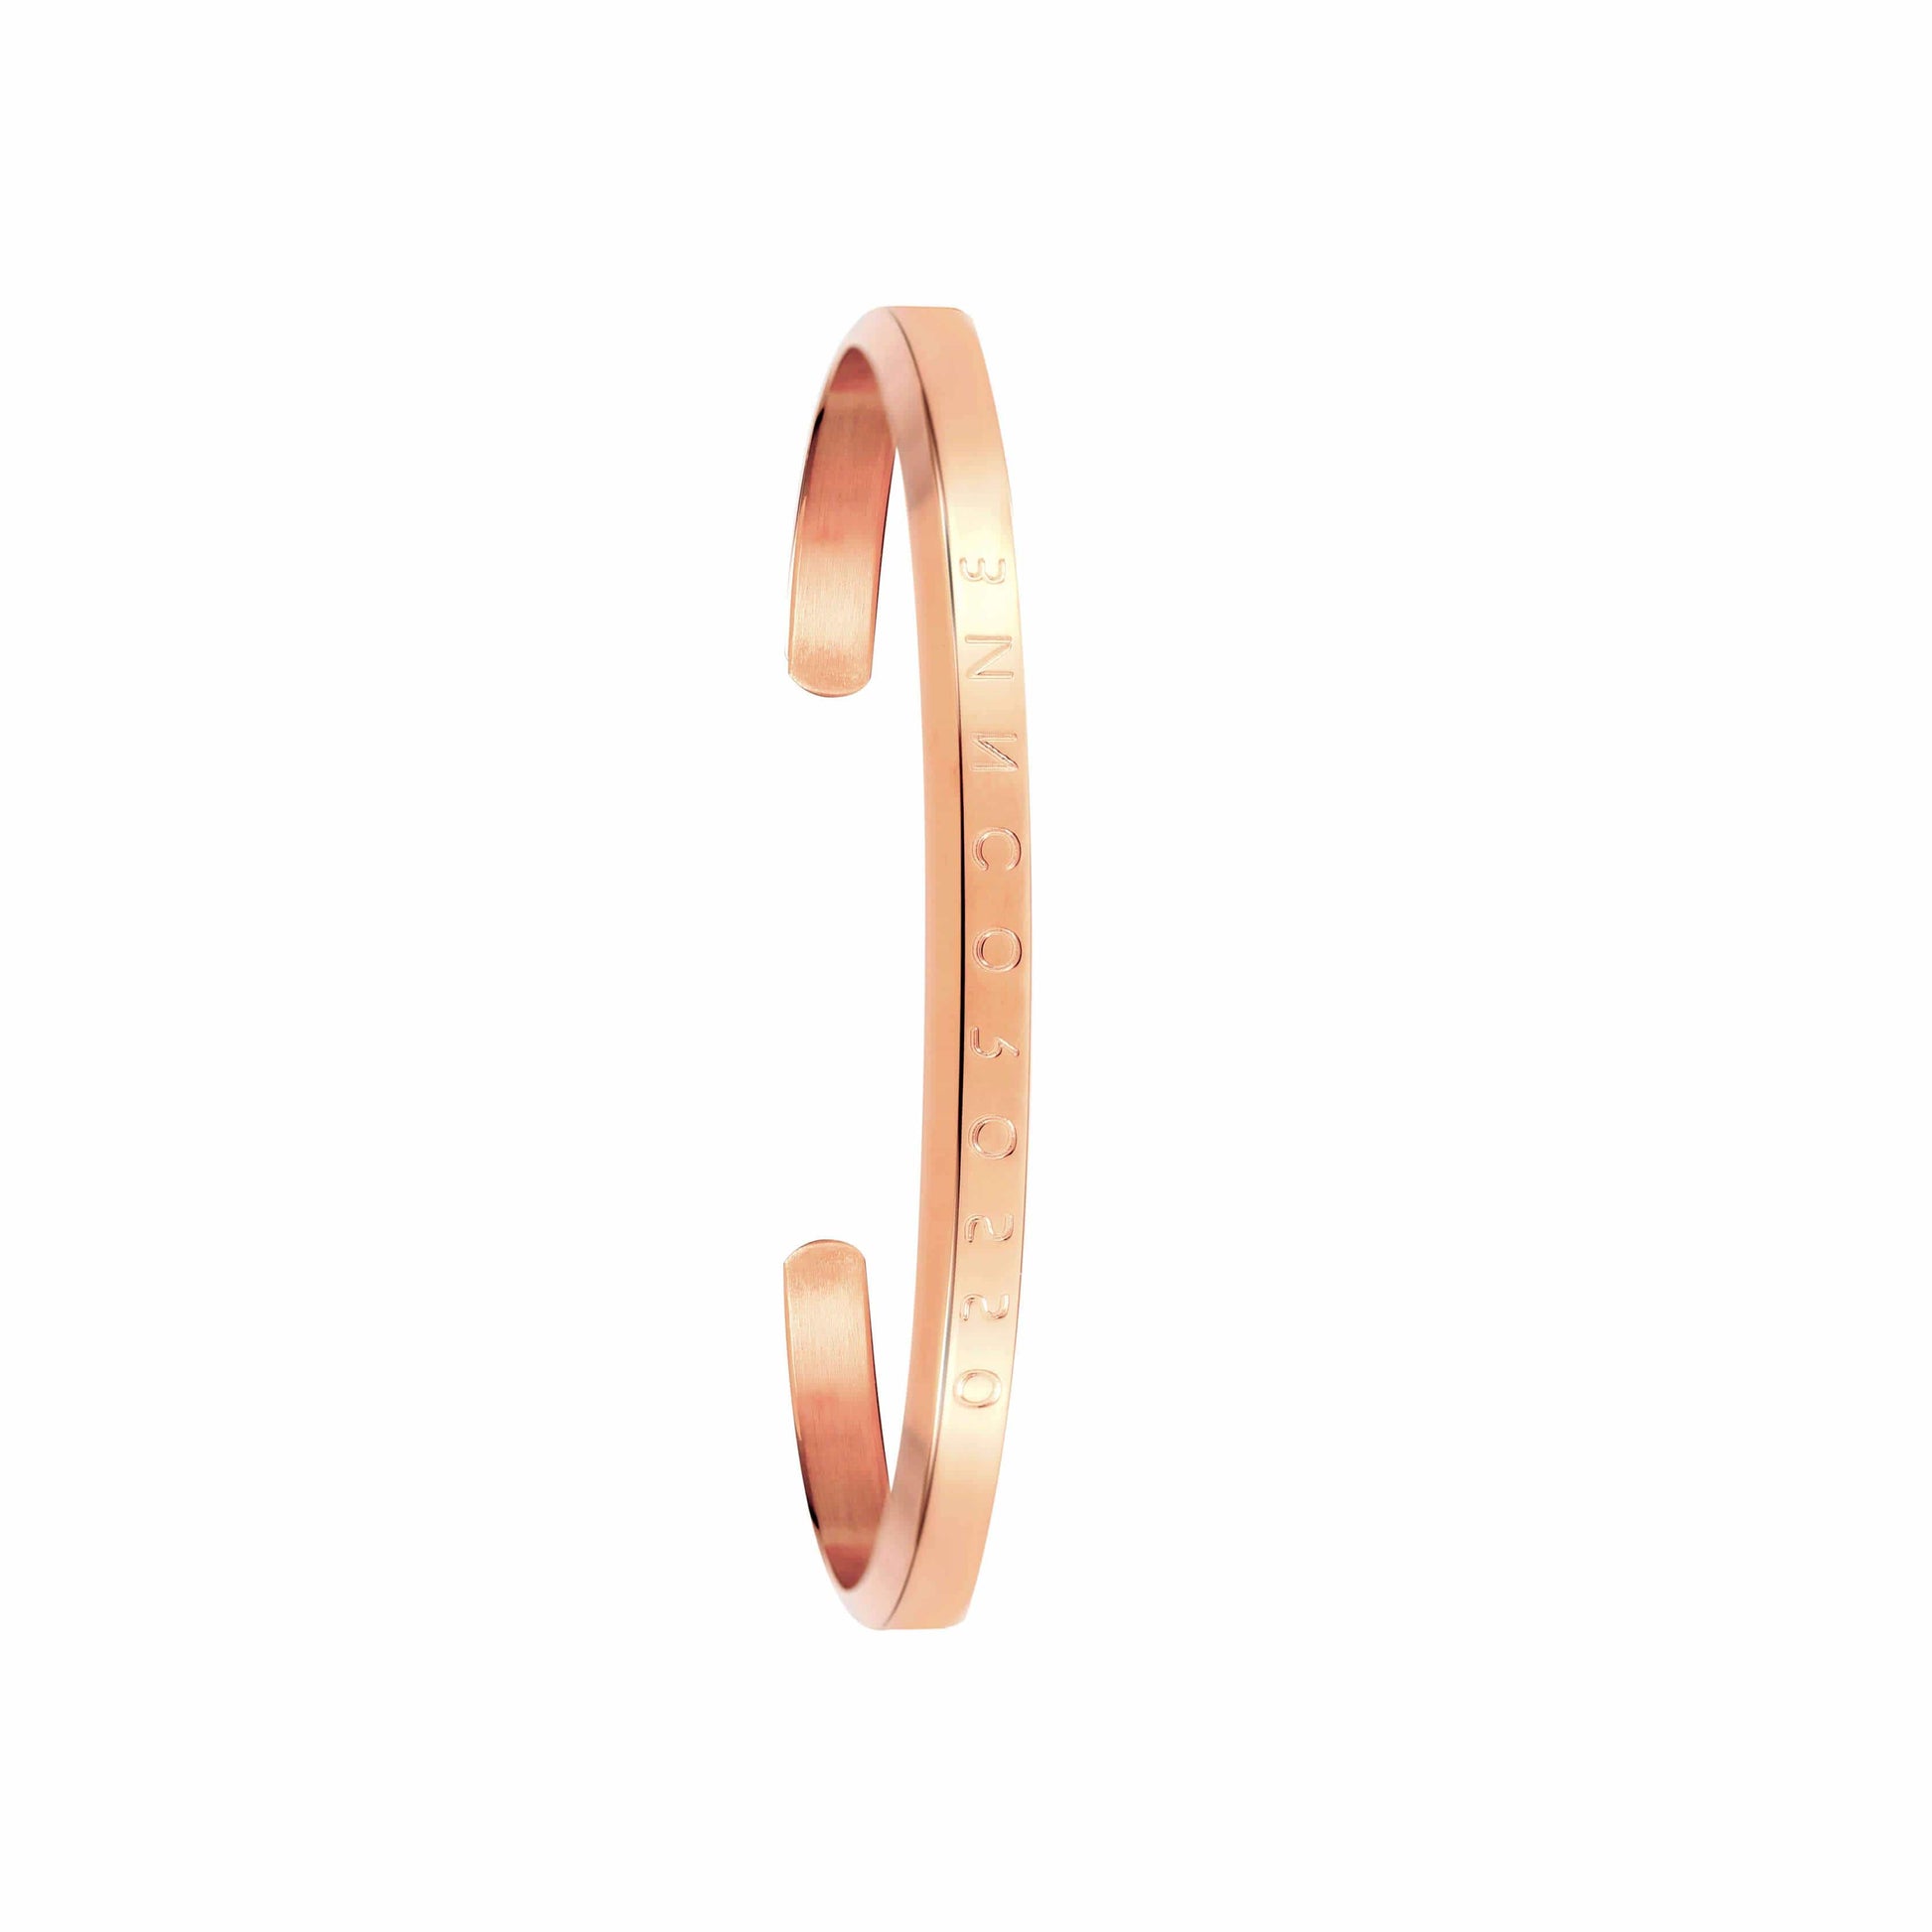 Bianco Rosso Watches Bracelet Small Classic Rose Gold Bracelet rologia cyprus greece